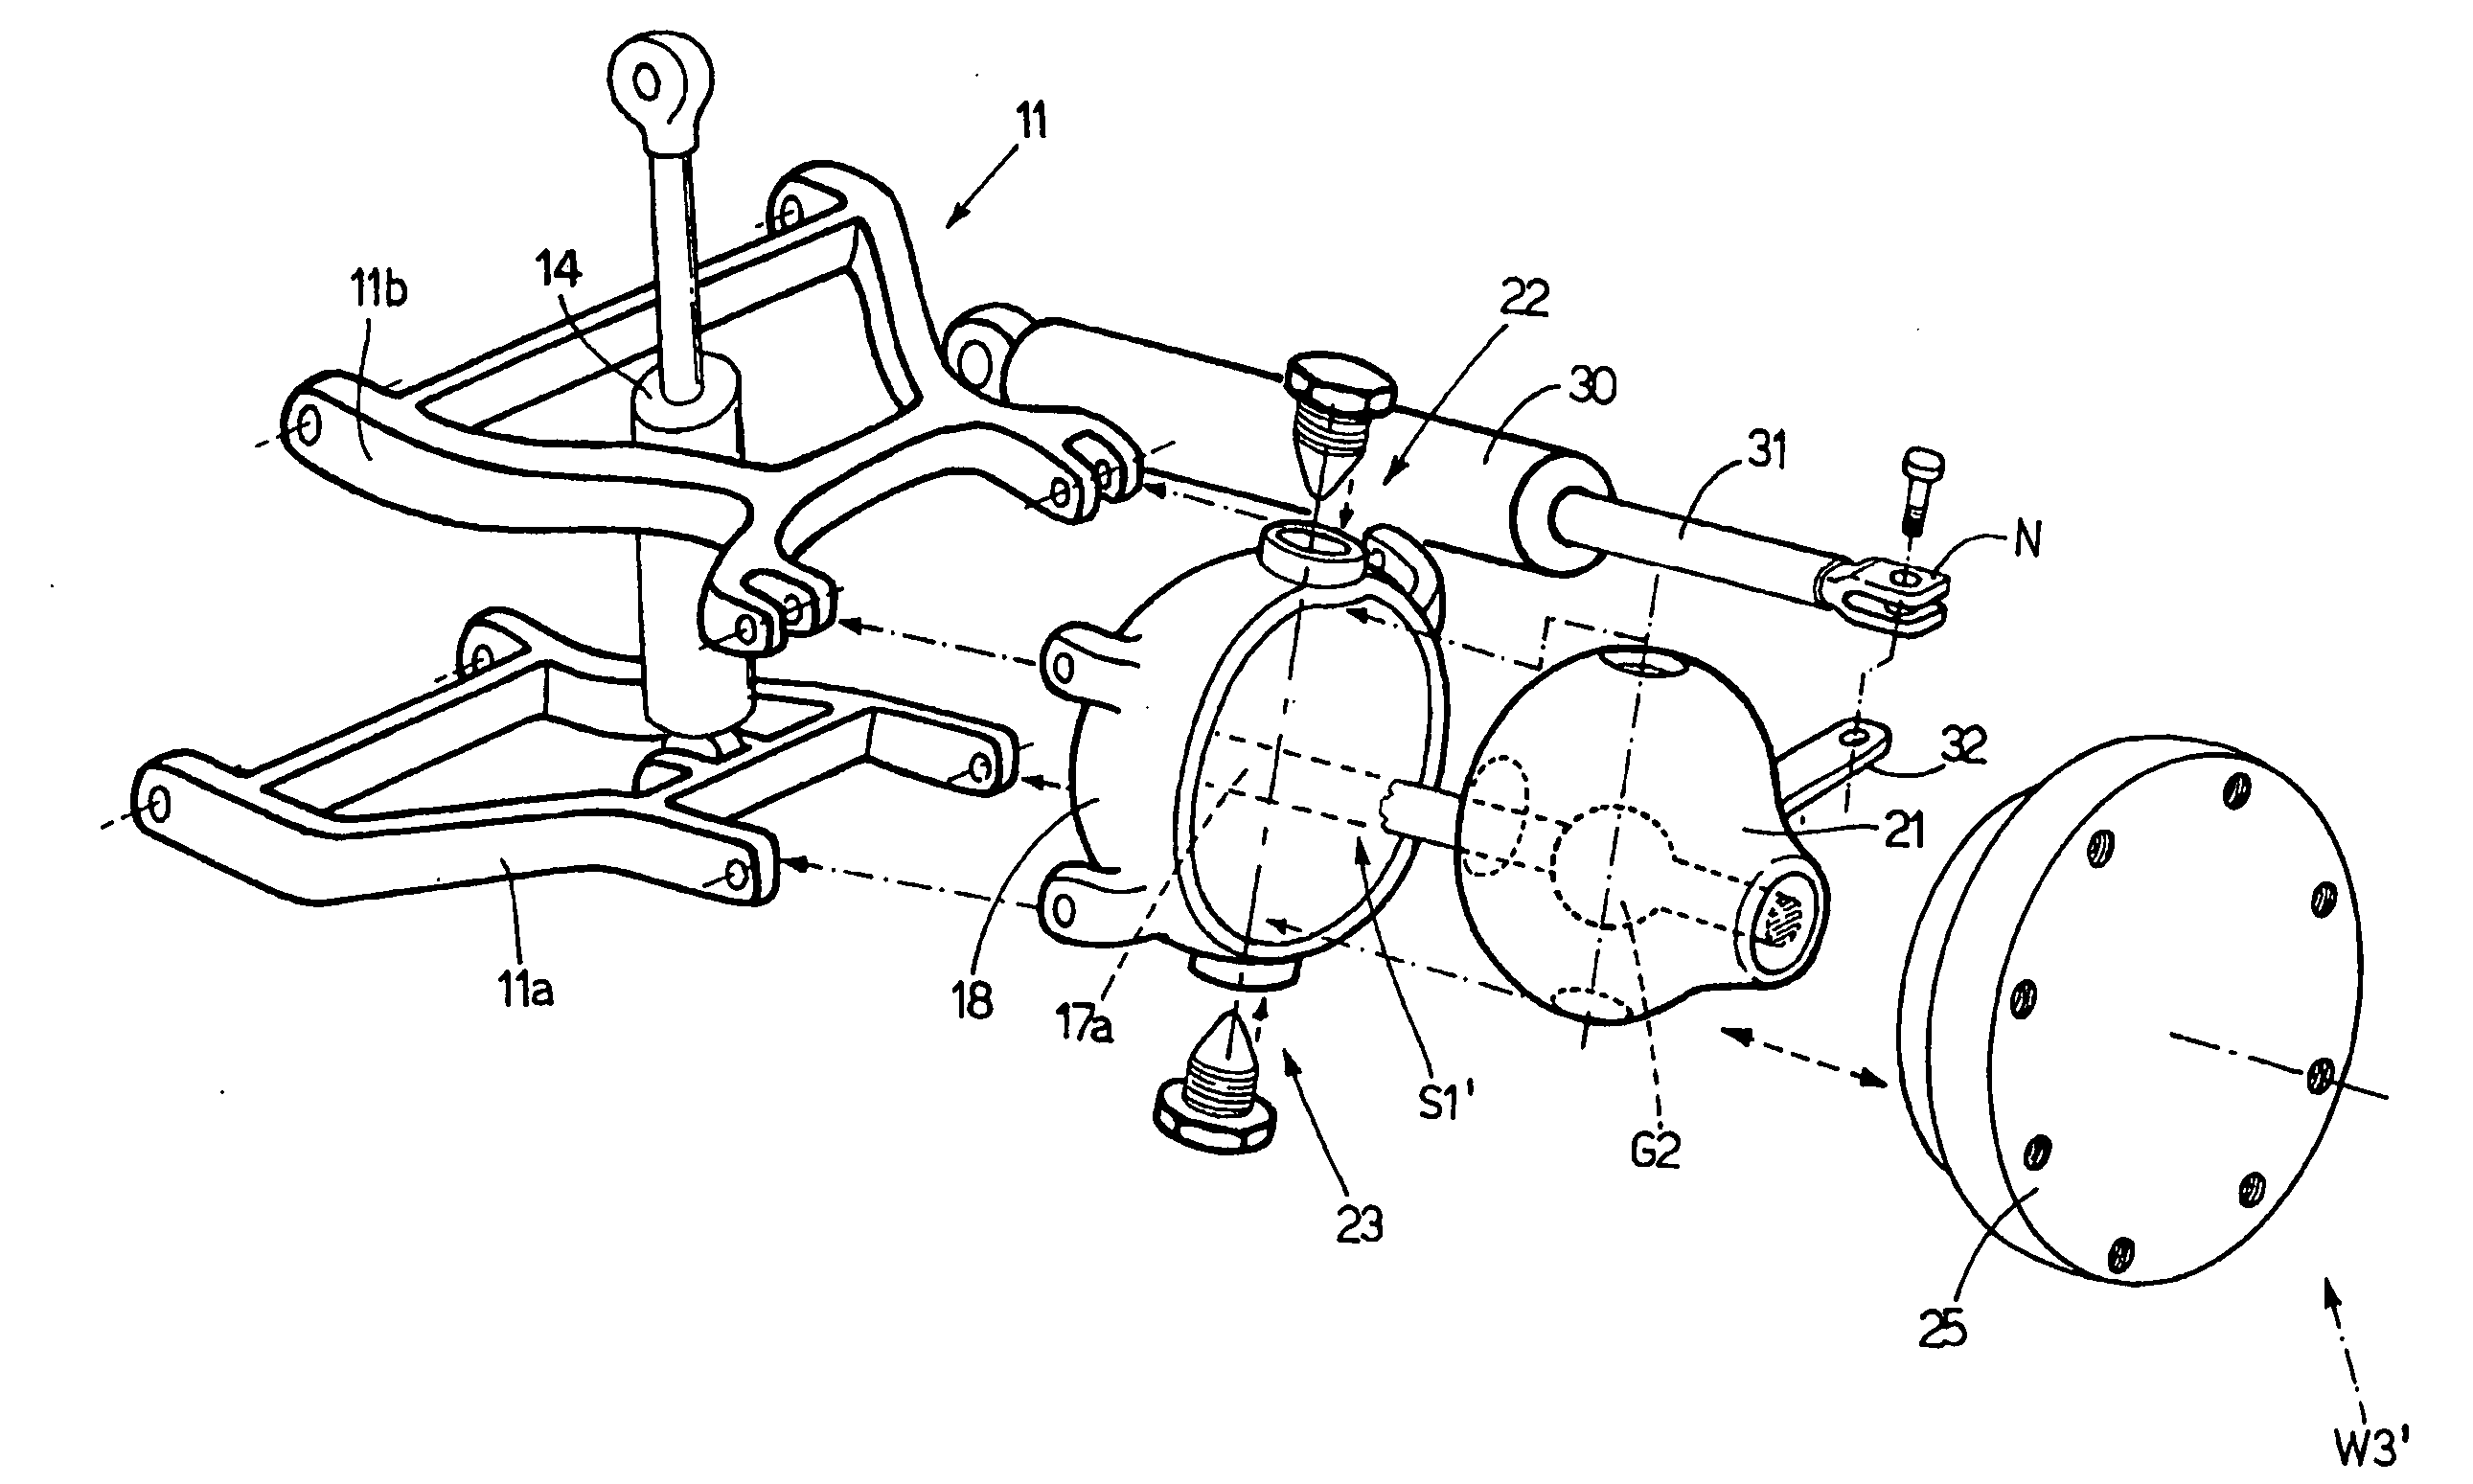 Suspended, articulated and powered front axle for work vehicle